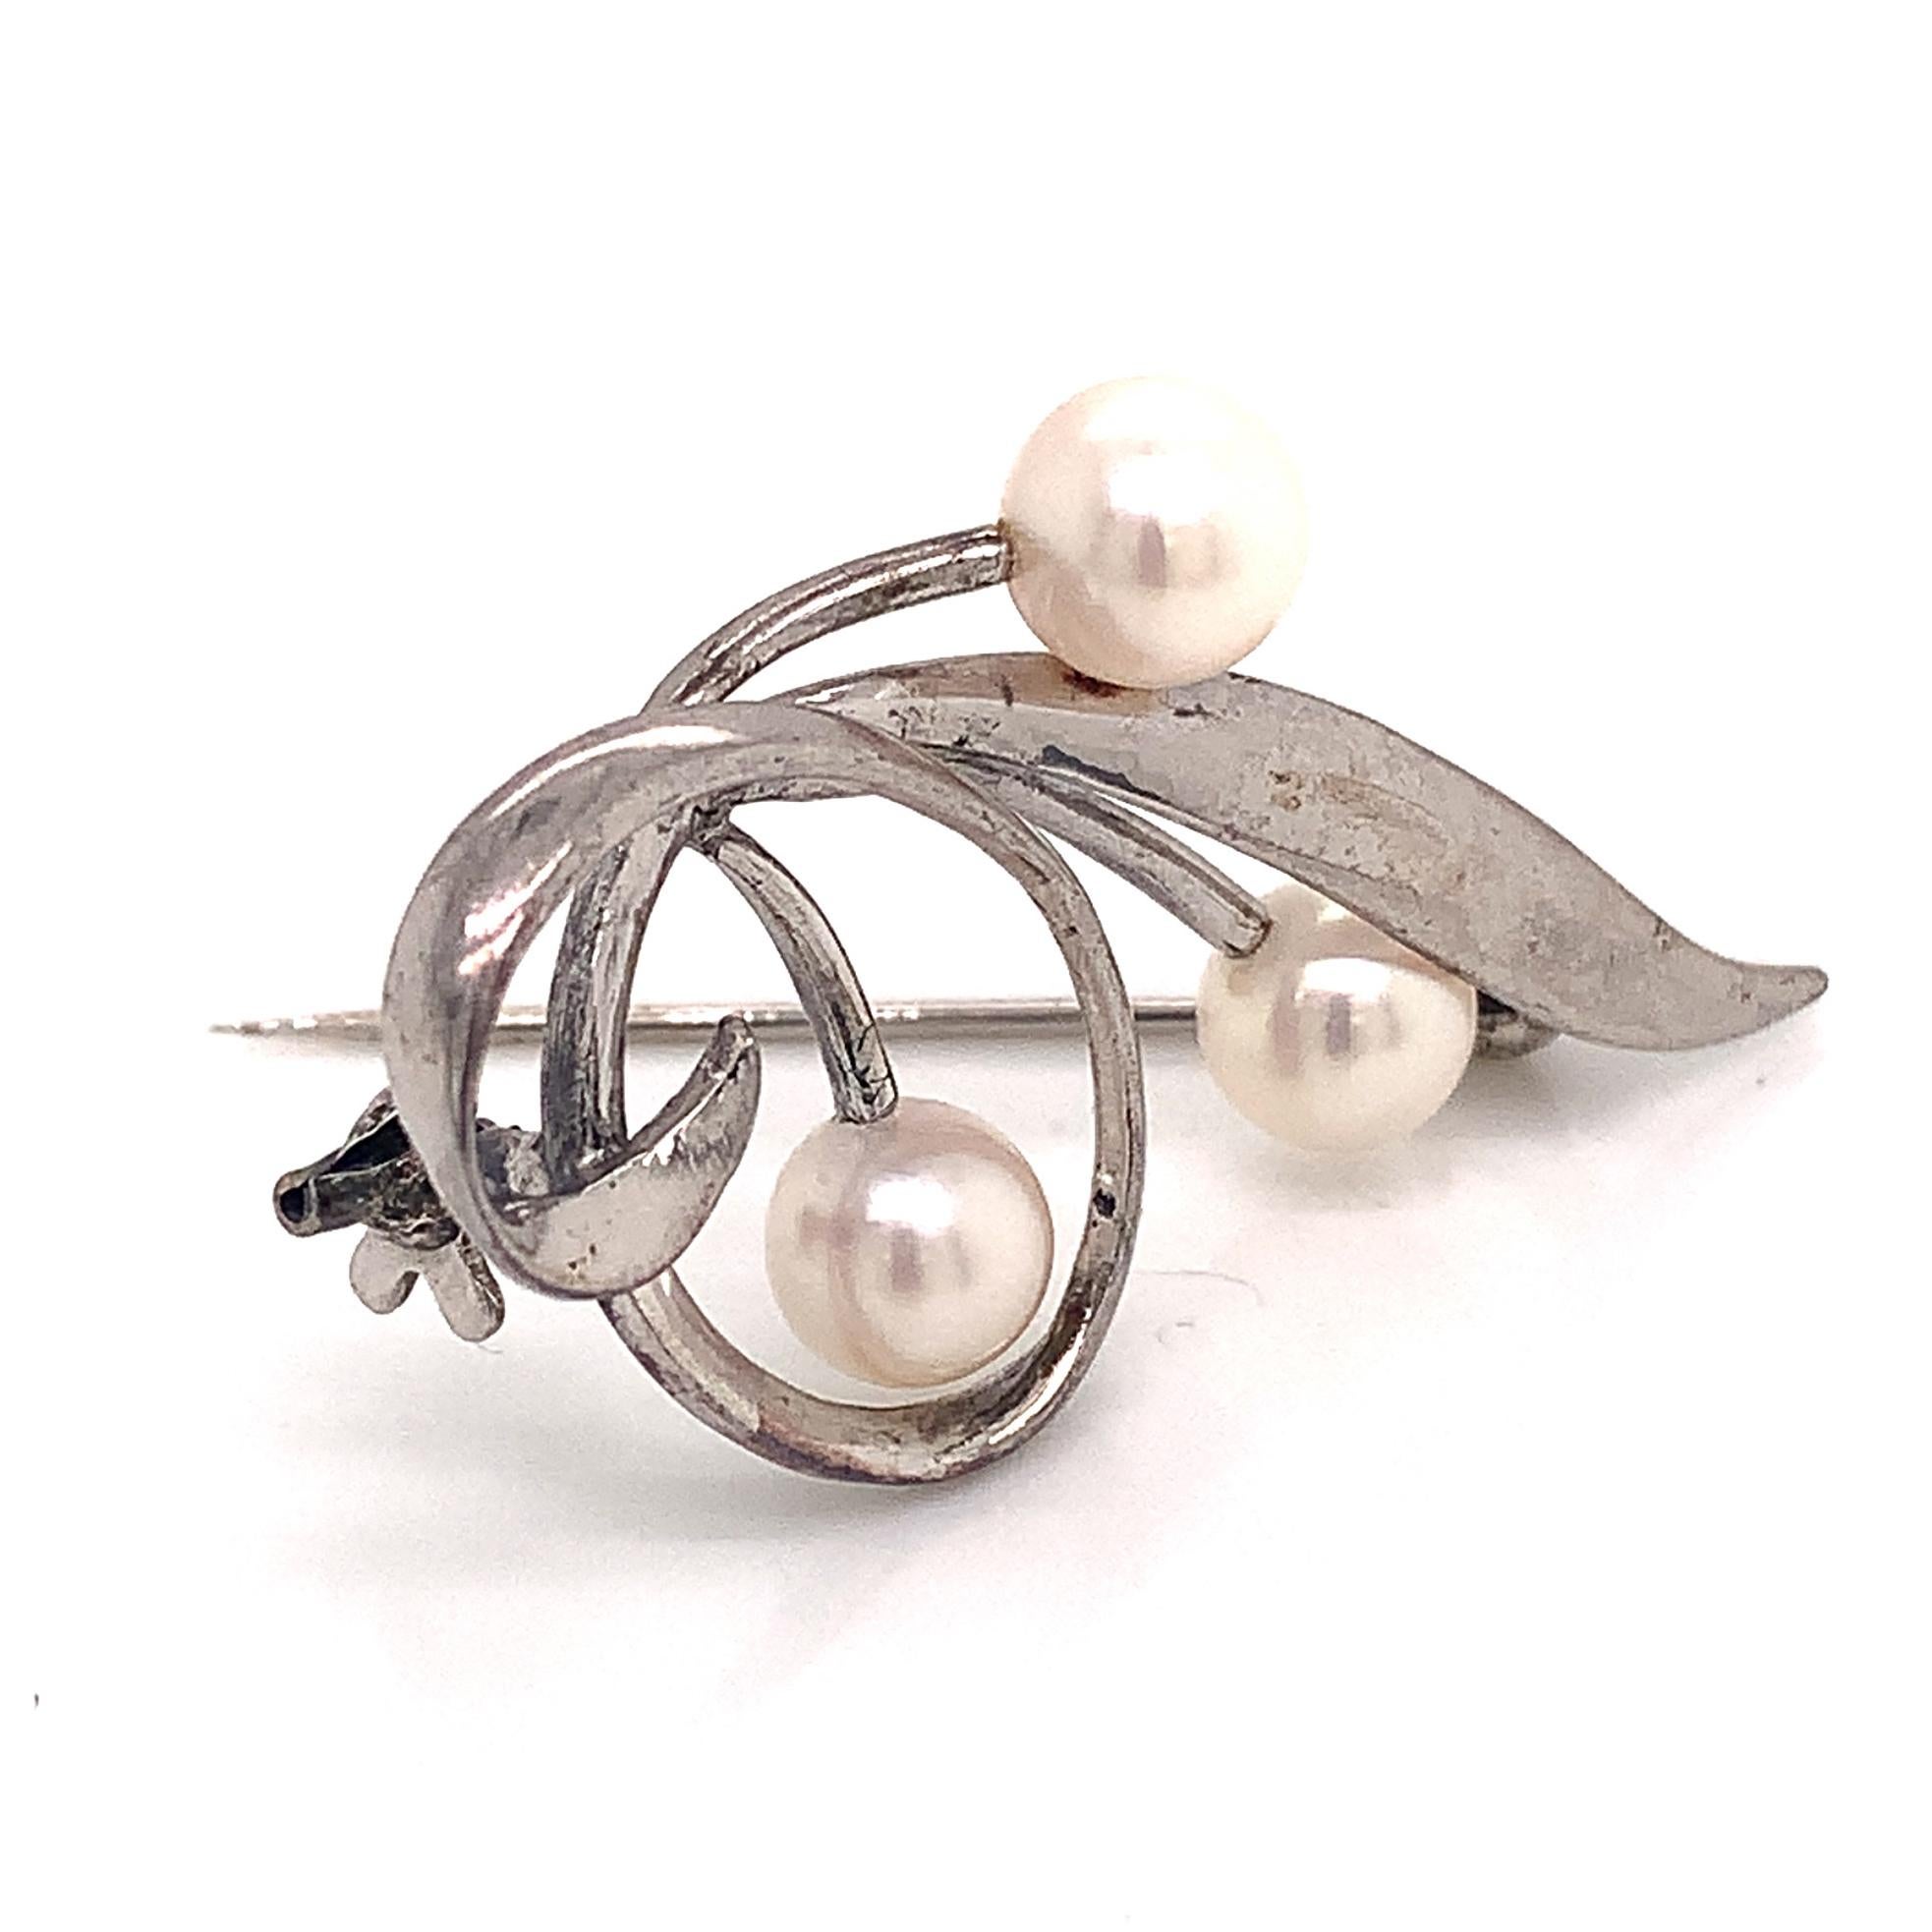 Mikimoto Estate Akoya Pearl Brooch Pin Sterling Silver M196

This elegant Authentic Mikimoto Estate sterling silver brooch pin has 3 Saltwater Akoya Cultured Pearls.

TRUSTED SELLER SINCE 2002

PLEASE SEE OUR HUNDREDS OF POSITIVE FEEDBACKS FROM OUR